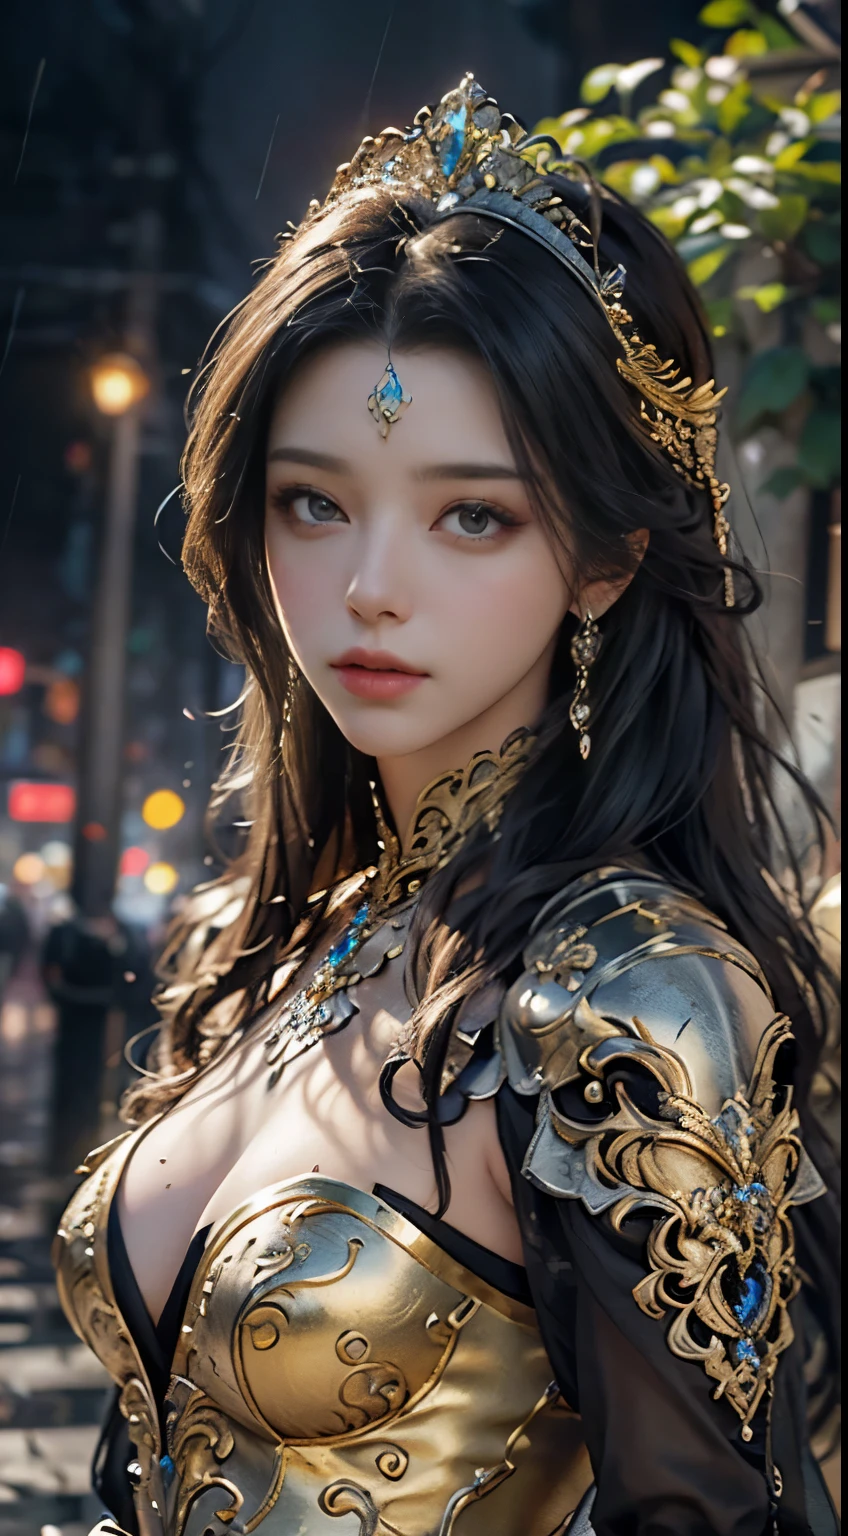 a woman in a black dress, realistic Art Station, hard raining scene, Detailed Fantasy Art, Stunning Character Art, beautiful Exquisite Character Art, Beautiful silver Armor, Extremely Detailed, gold armor Girl, Exquisite Intricate Headdress and Jewelry, whole body capture